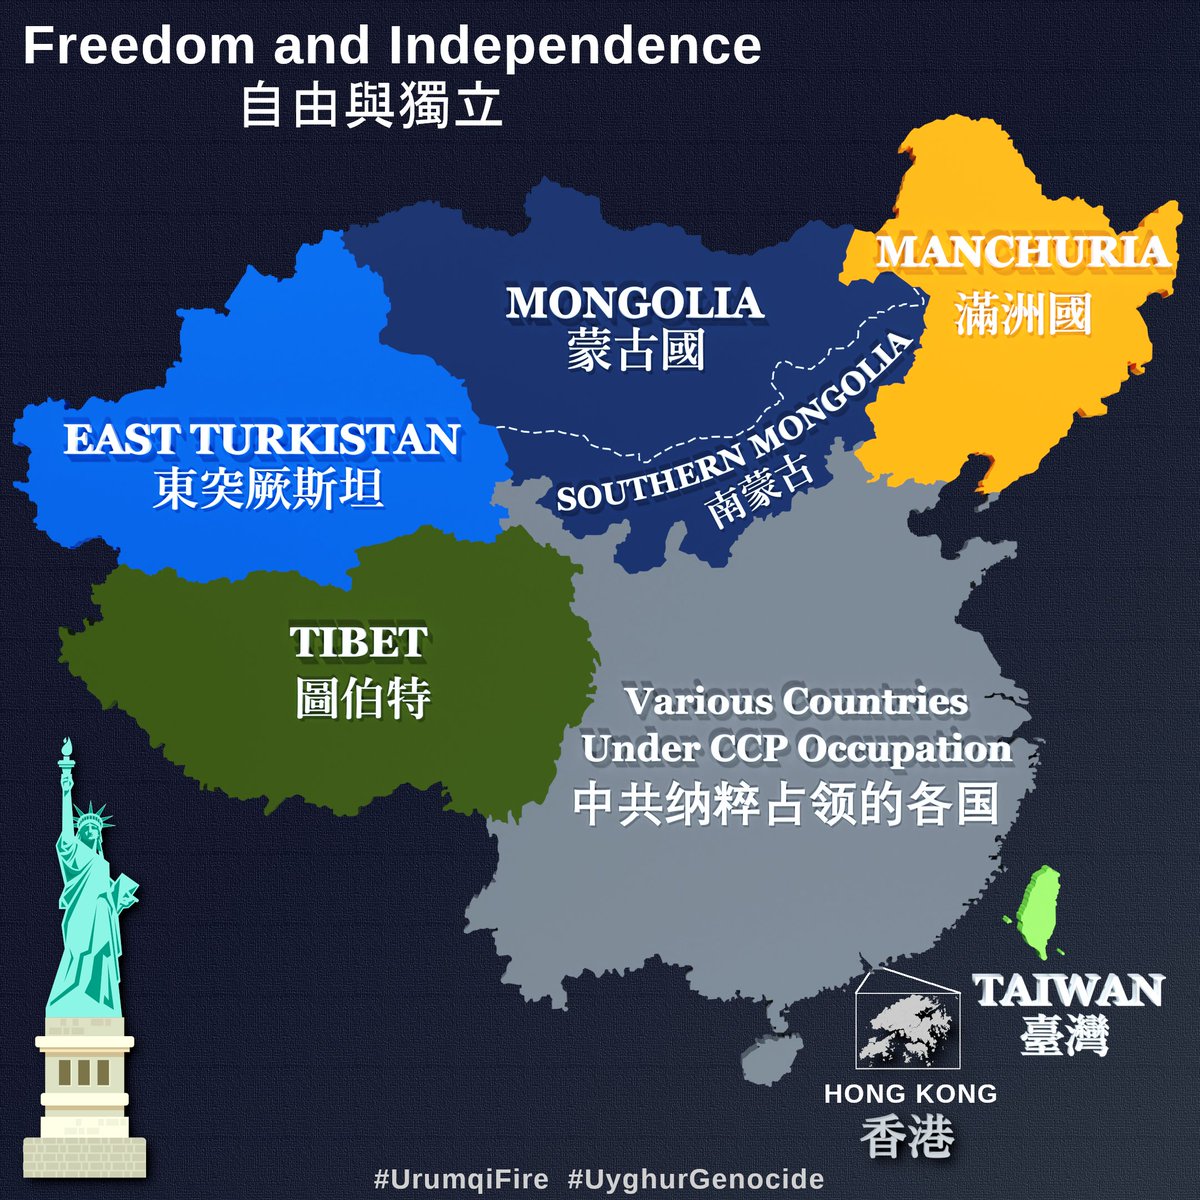 We will not ask for freedom!
We will not wait for the freedom to be handed to us!
We will take freedom!
We will fight for freedom!
We are Freedom Fighters!
Restore our freedom & independence!✊
#EastTurkistan #UyghurGenocide #Tibet #HongKong #Manchuria #SouthernMongolia #Taiwan